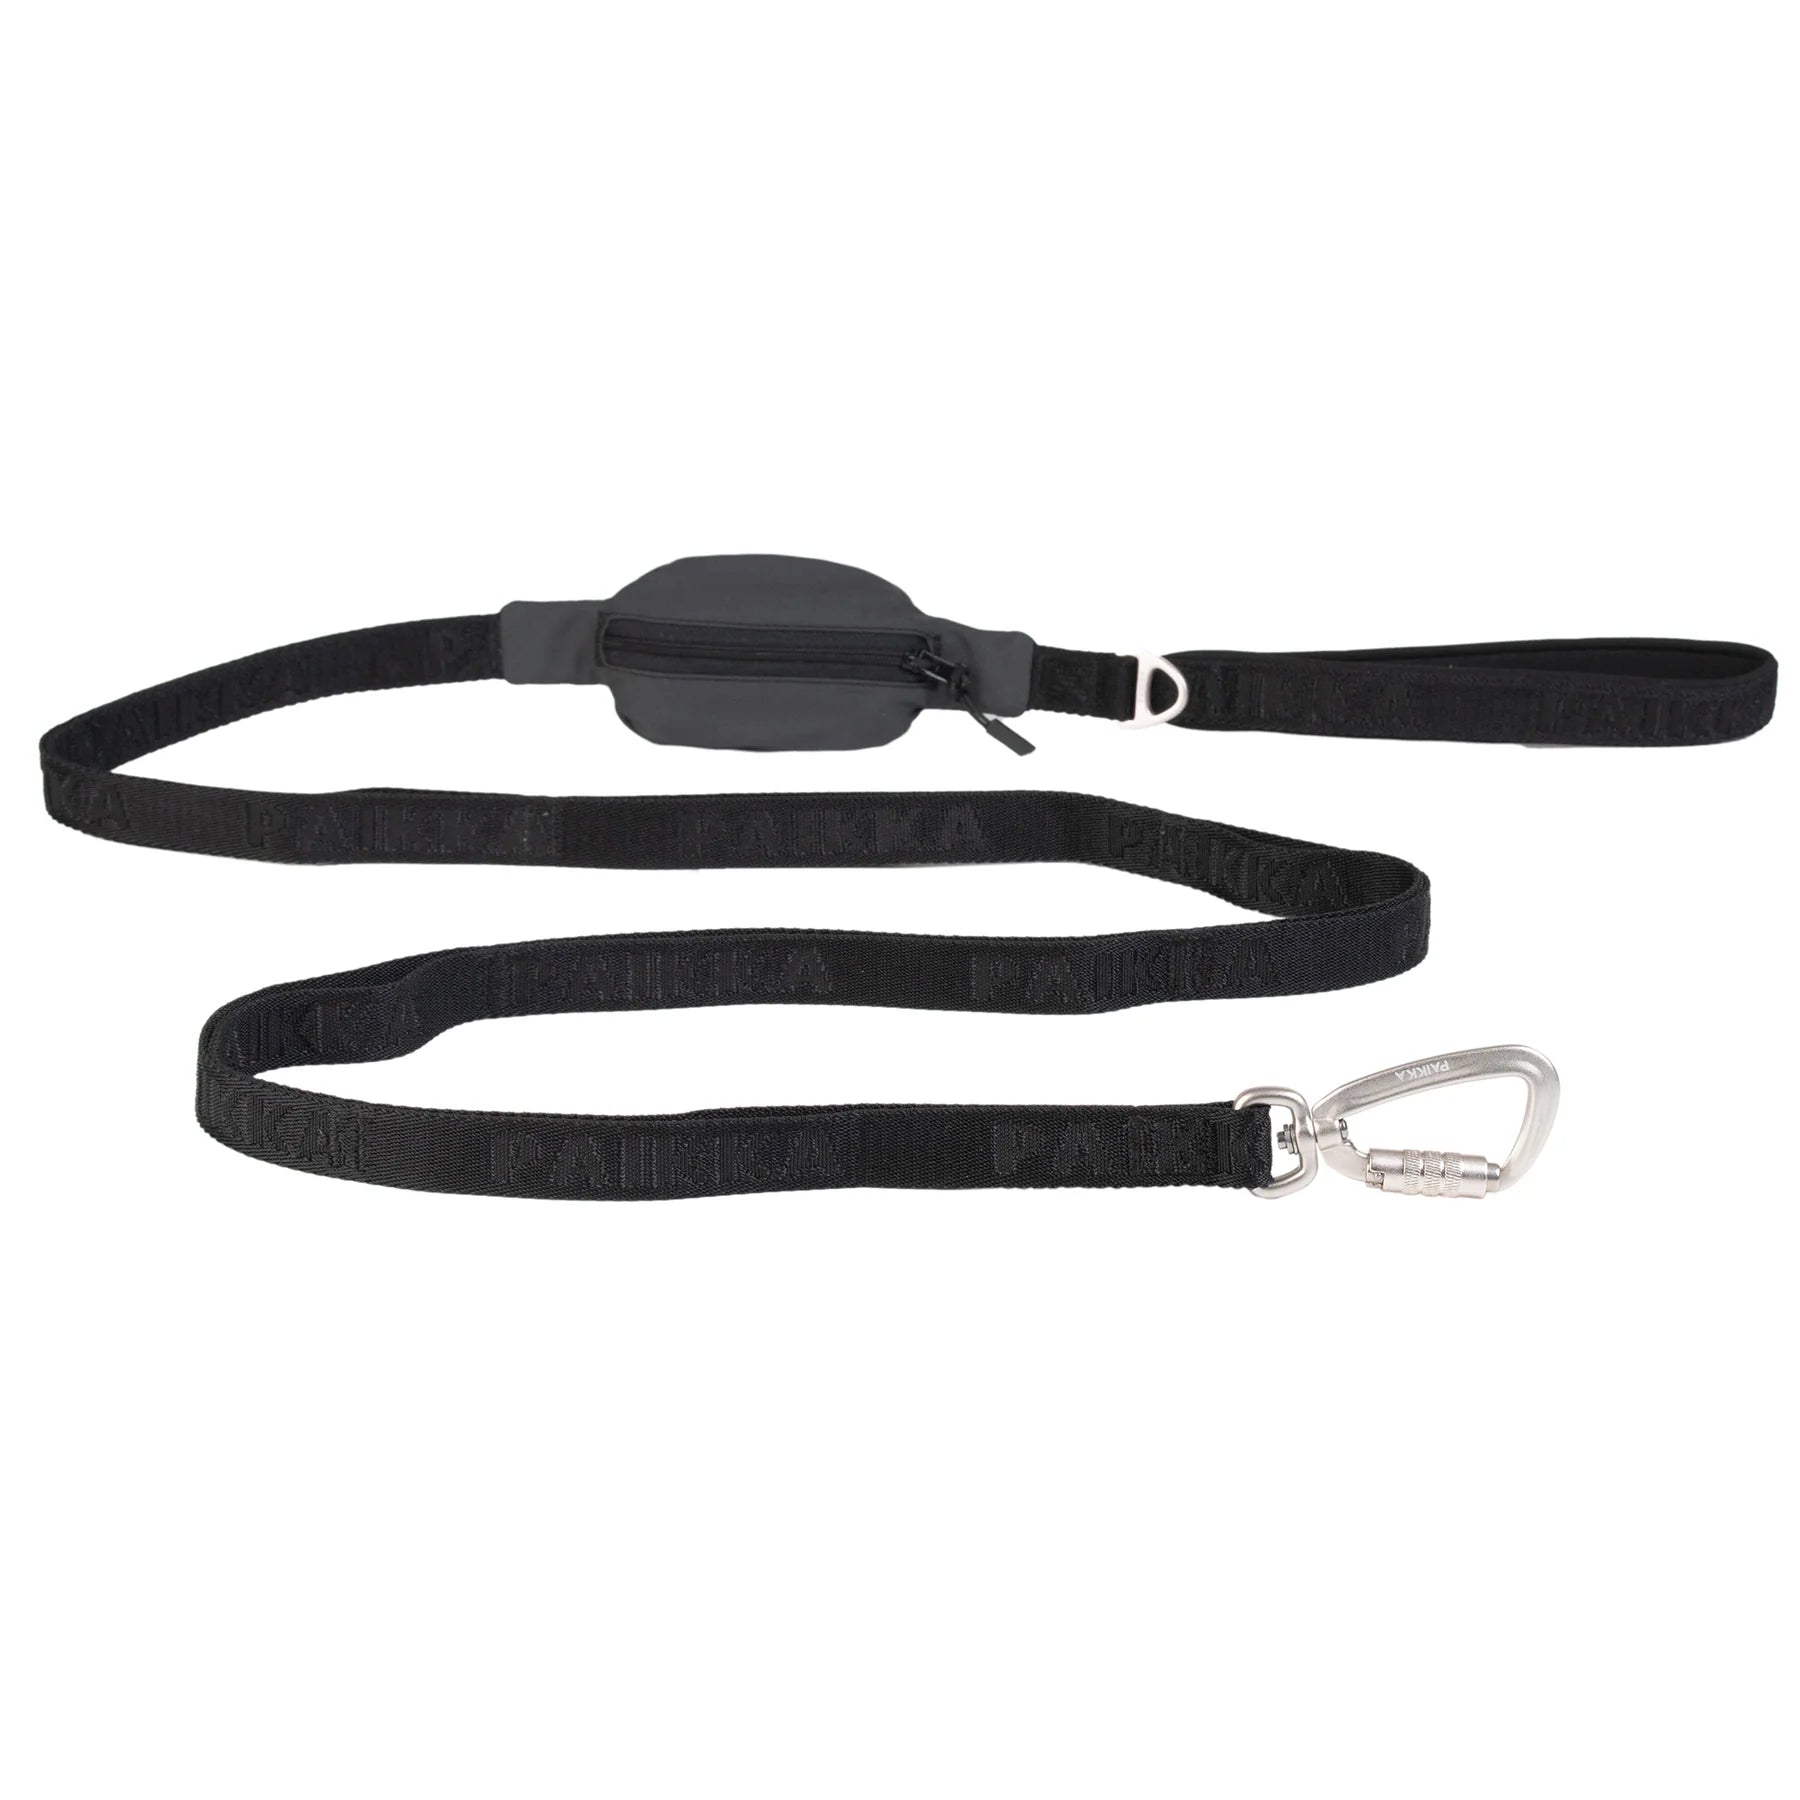 Visibility Leash for Dogs